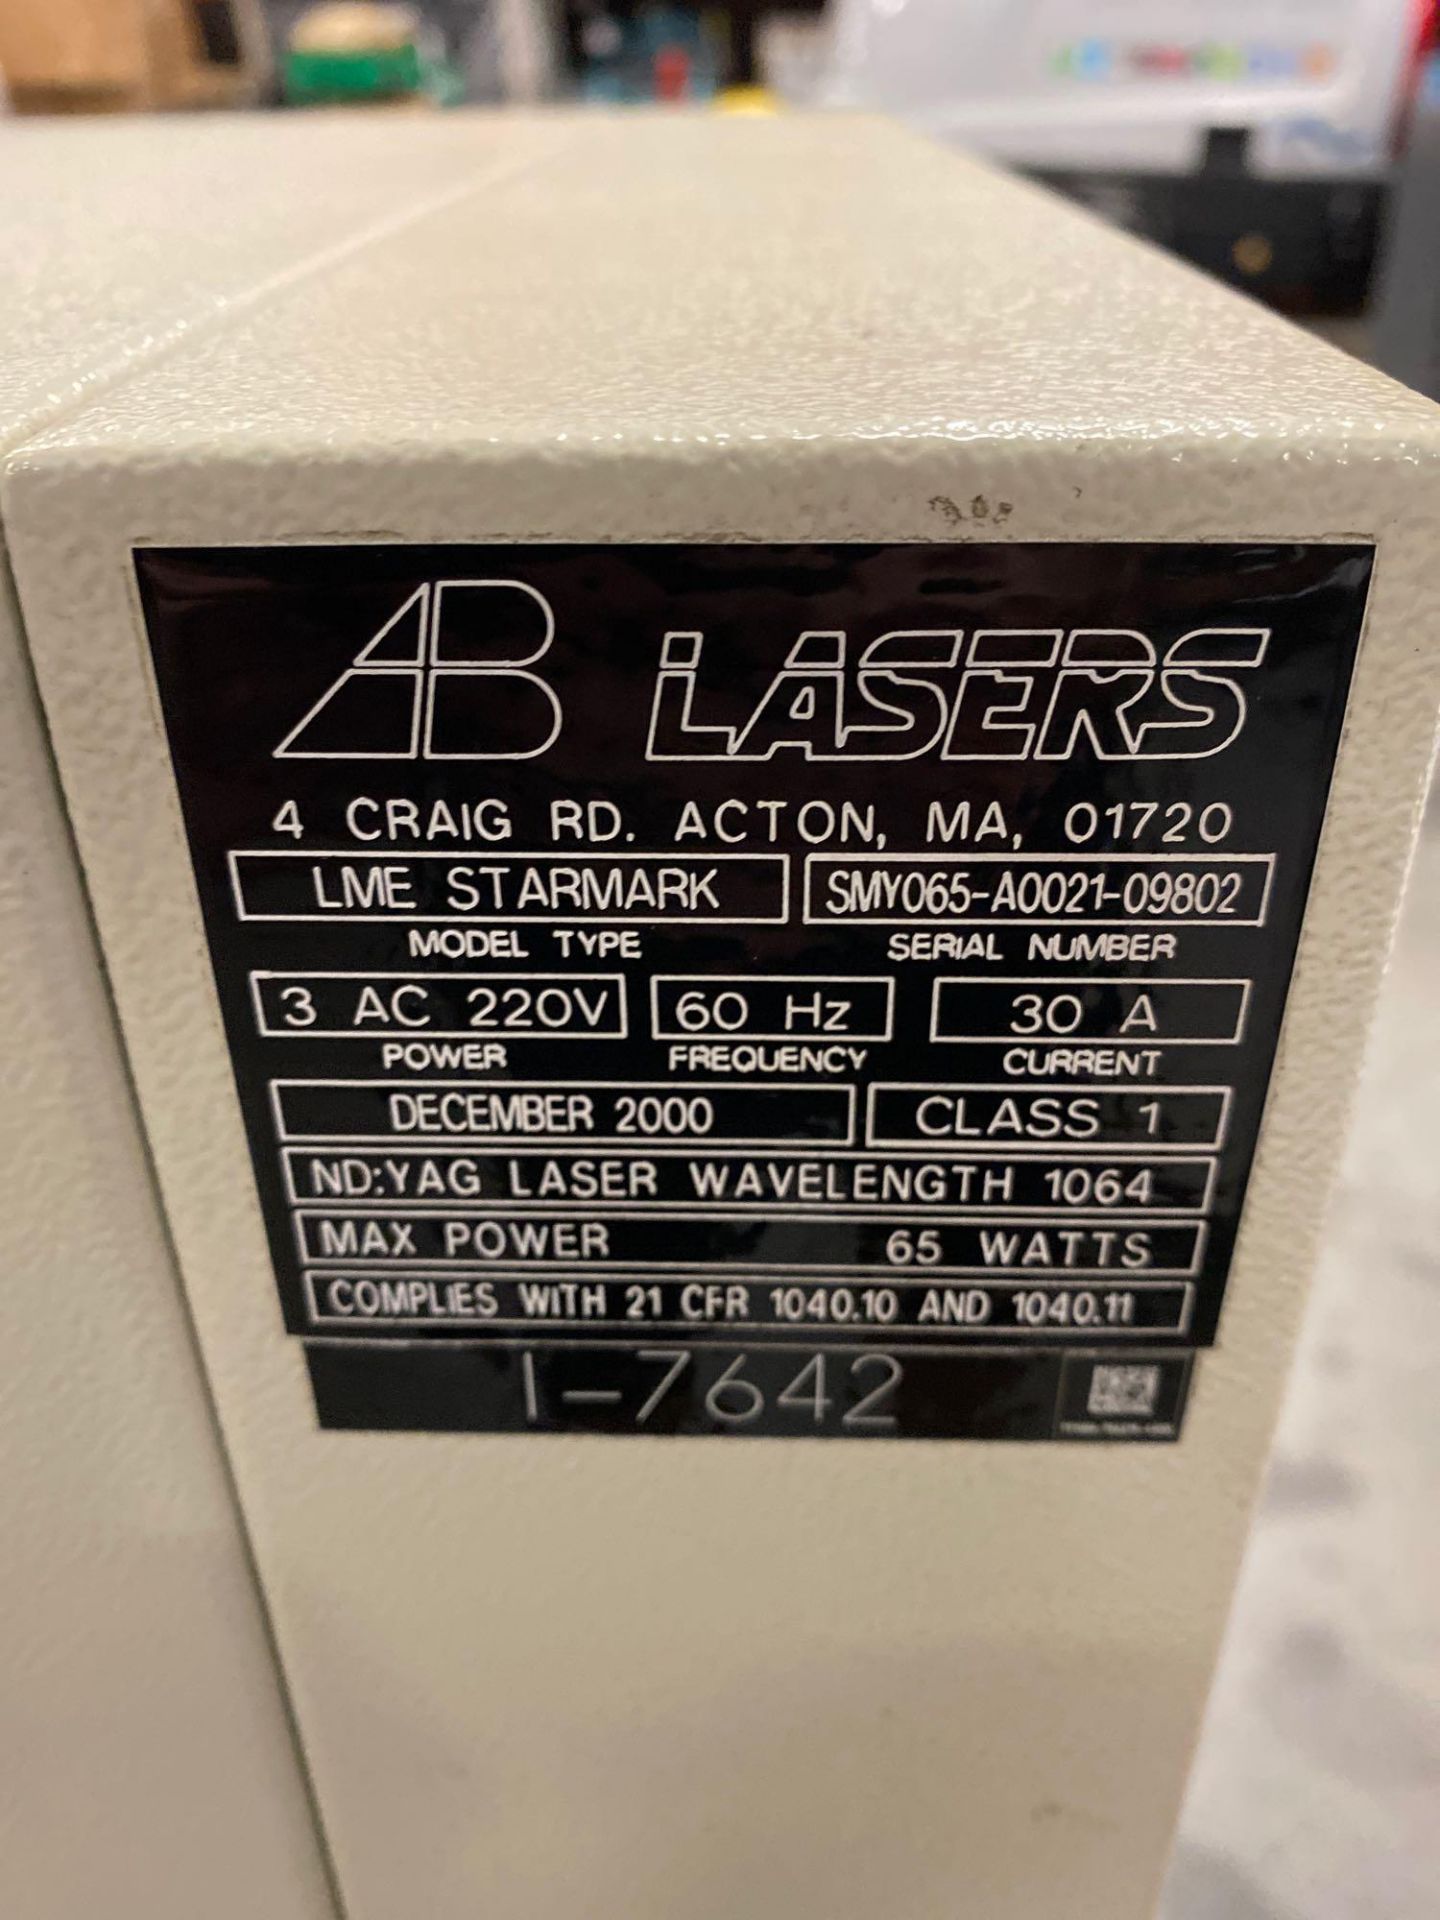 AB LASER, LME STARMARK 65W YAG LASER WAVELENGTH 1064, WAS OPERATING WHEN TAKEN OUT OF SERVICE - Image 18 of 20